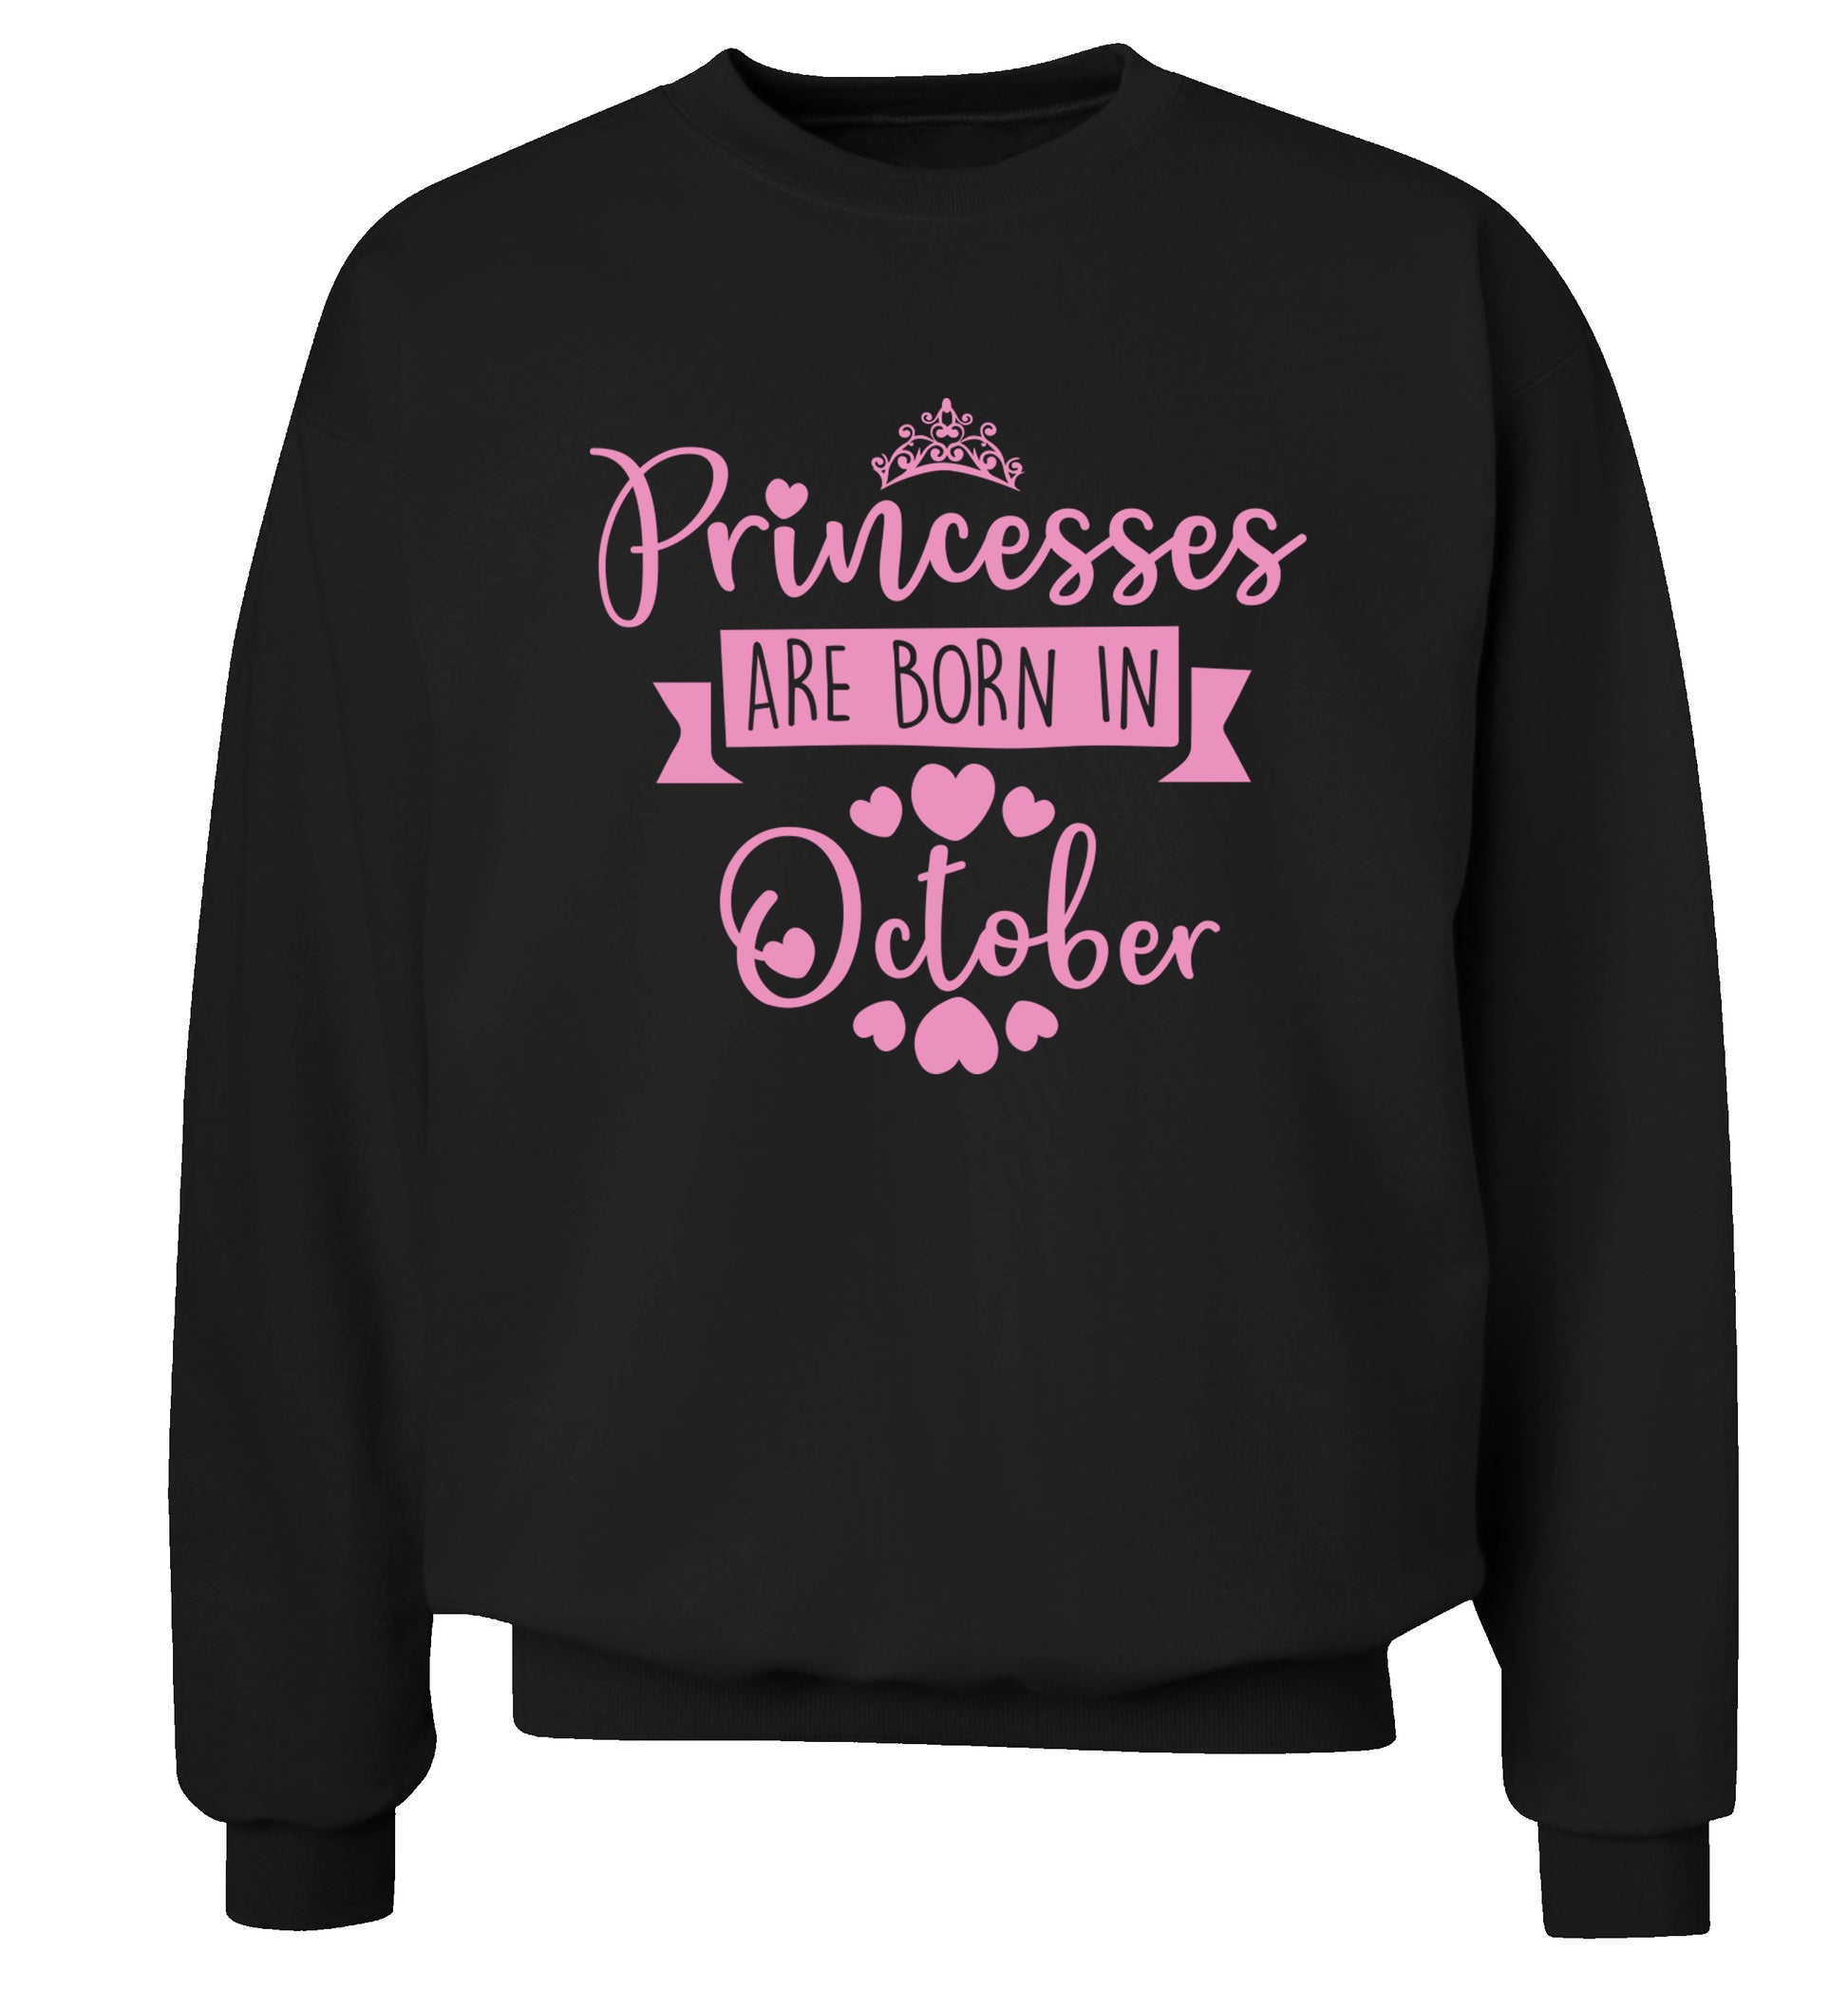 Princesses are born in October Adult's unisex black Sweater 2XL